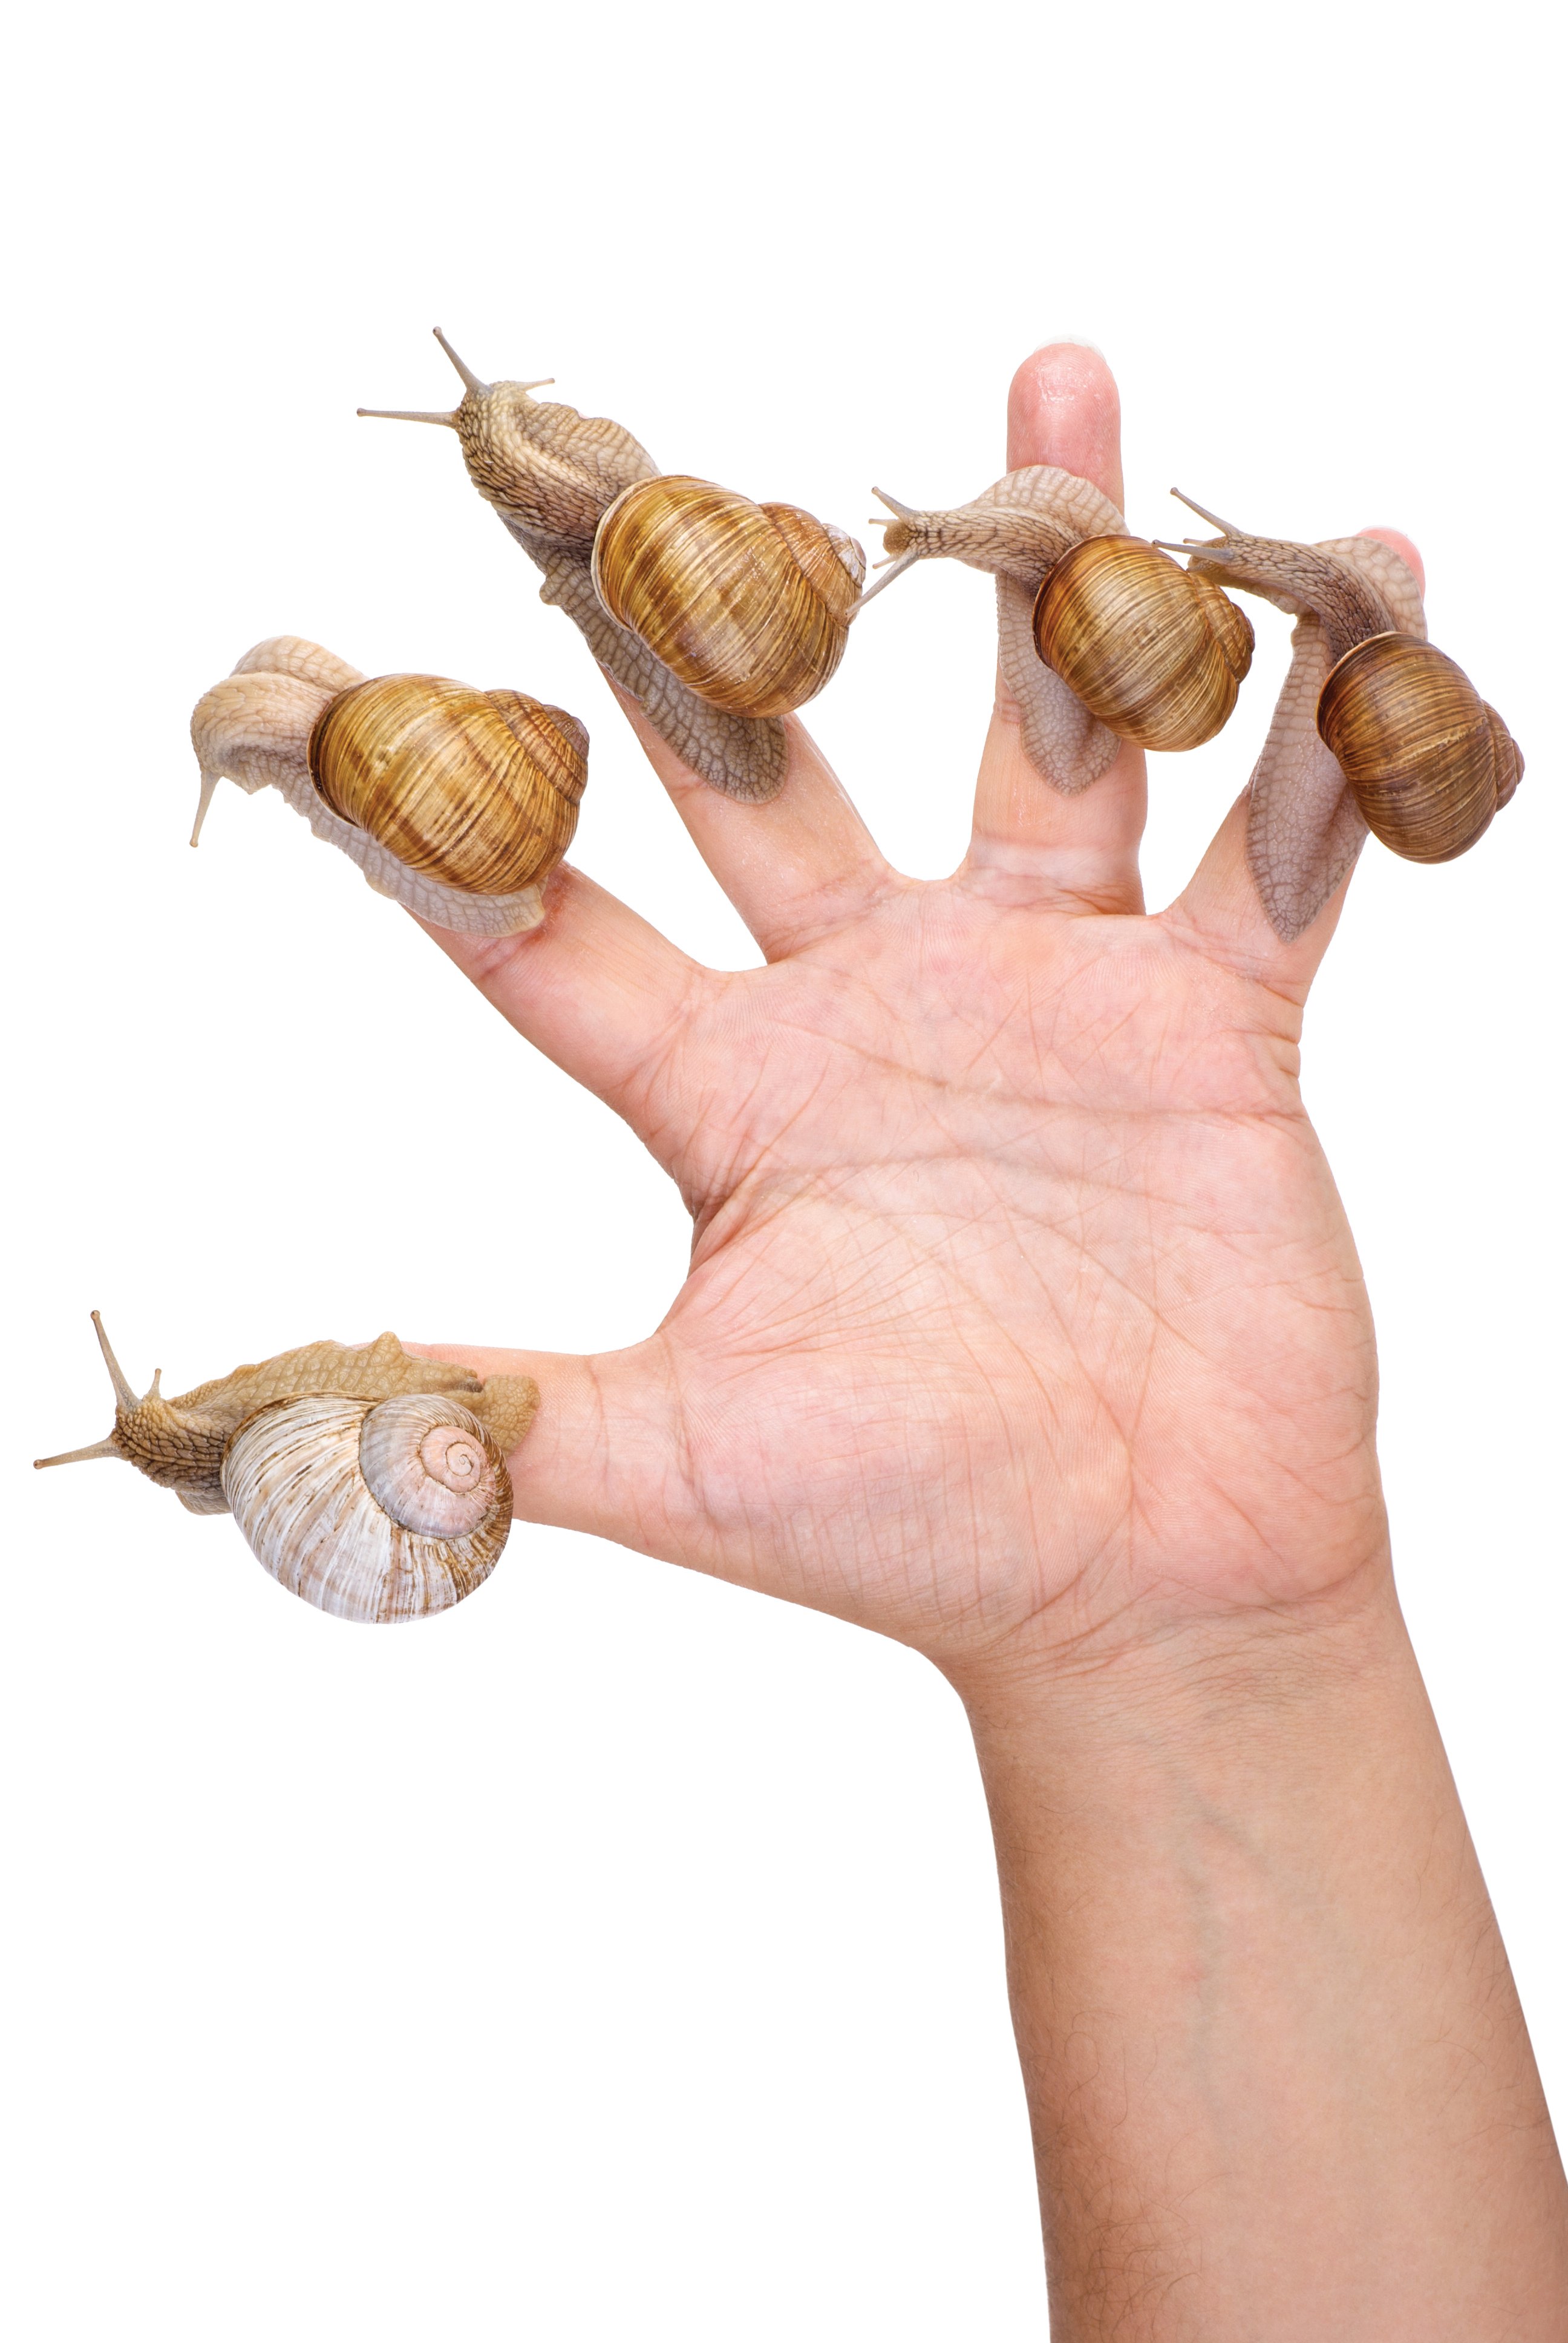 Where to Find Giant Snails